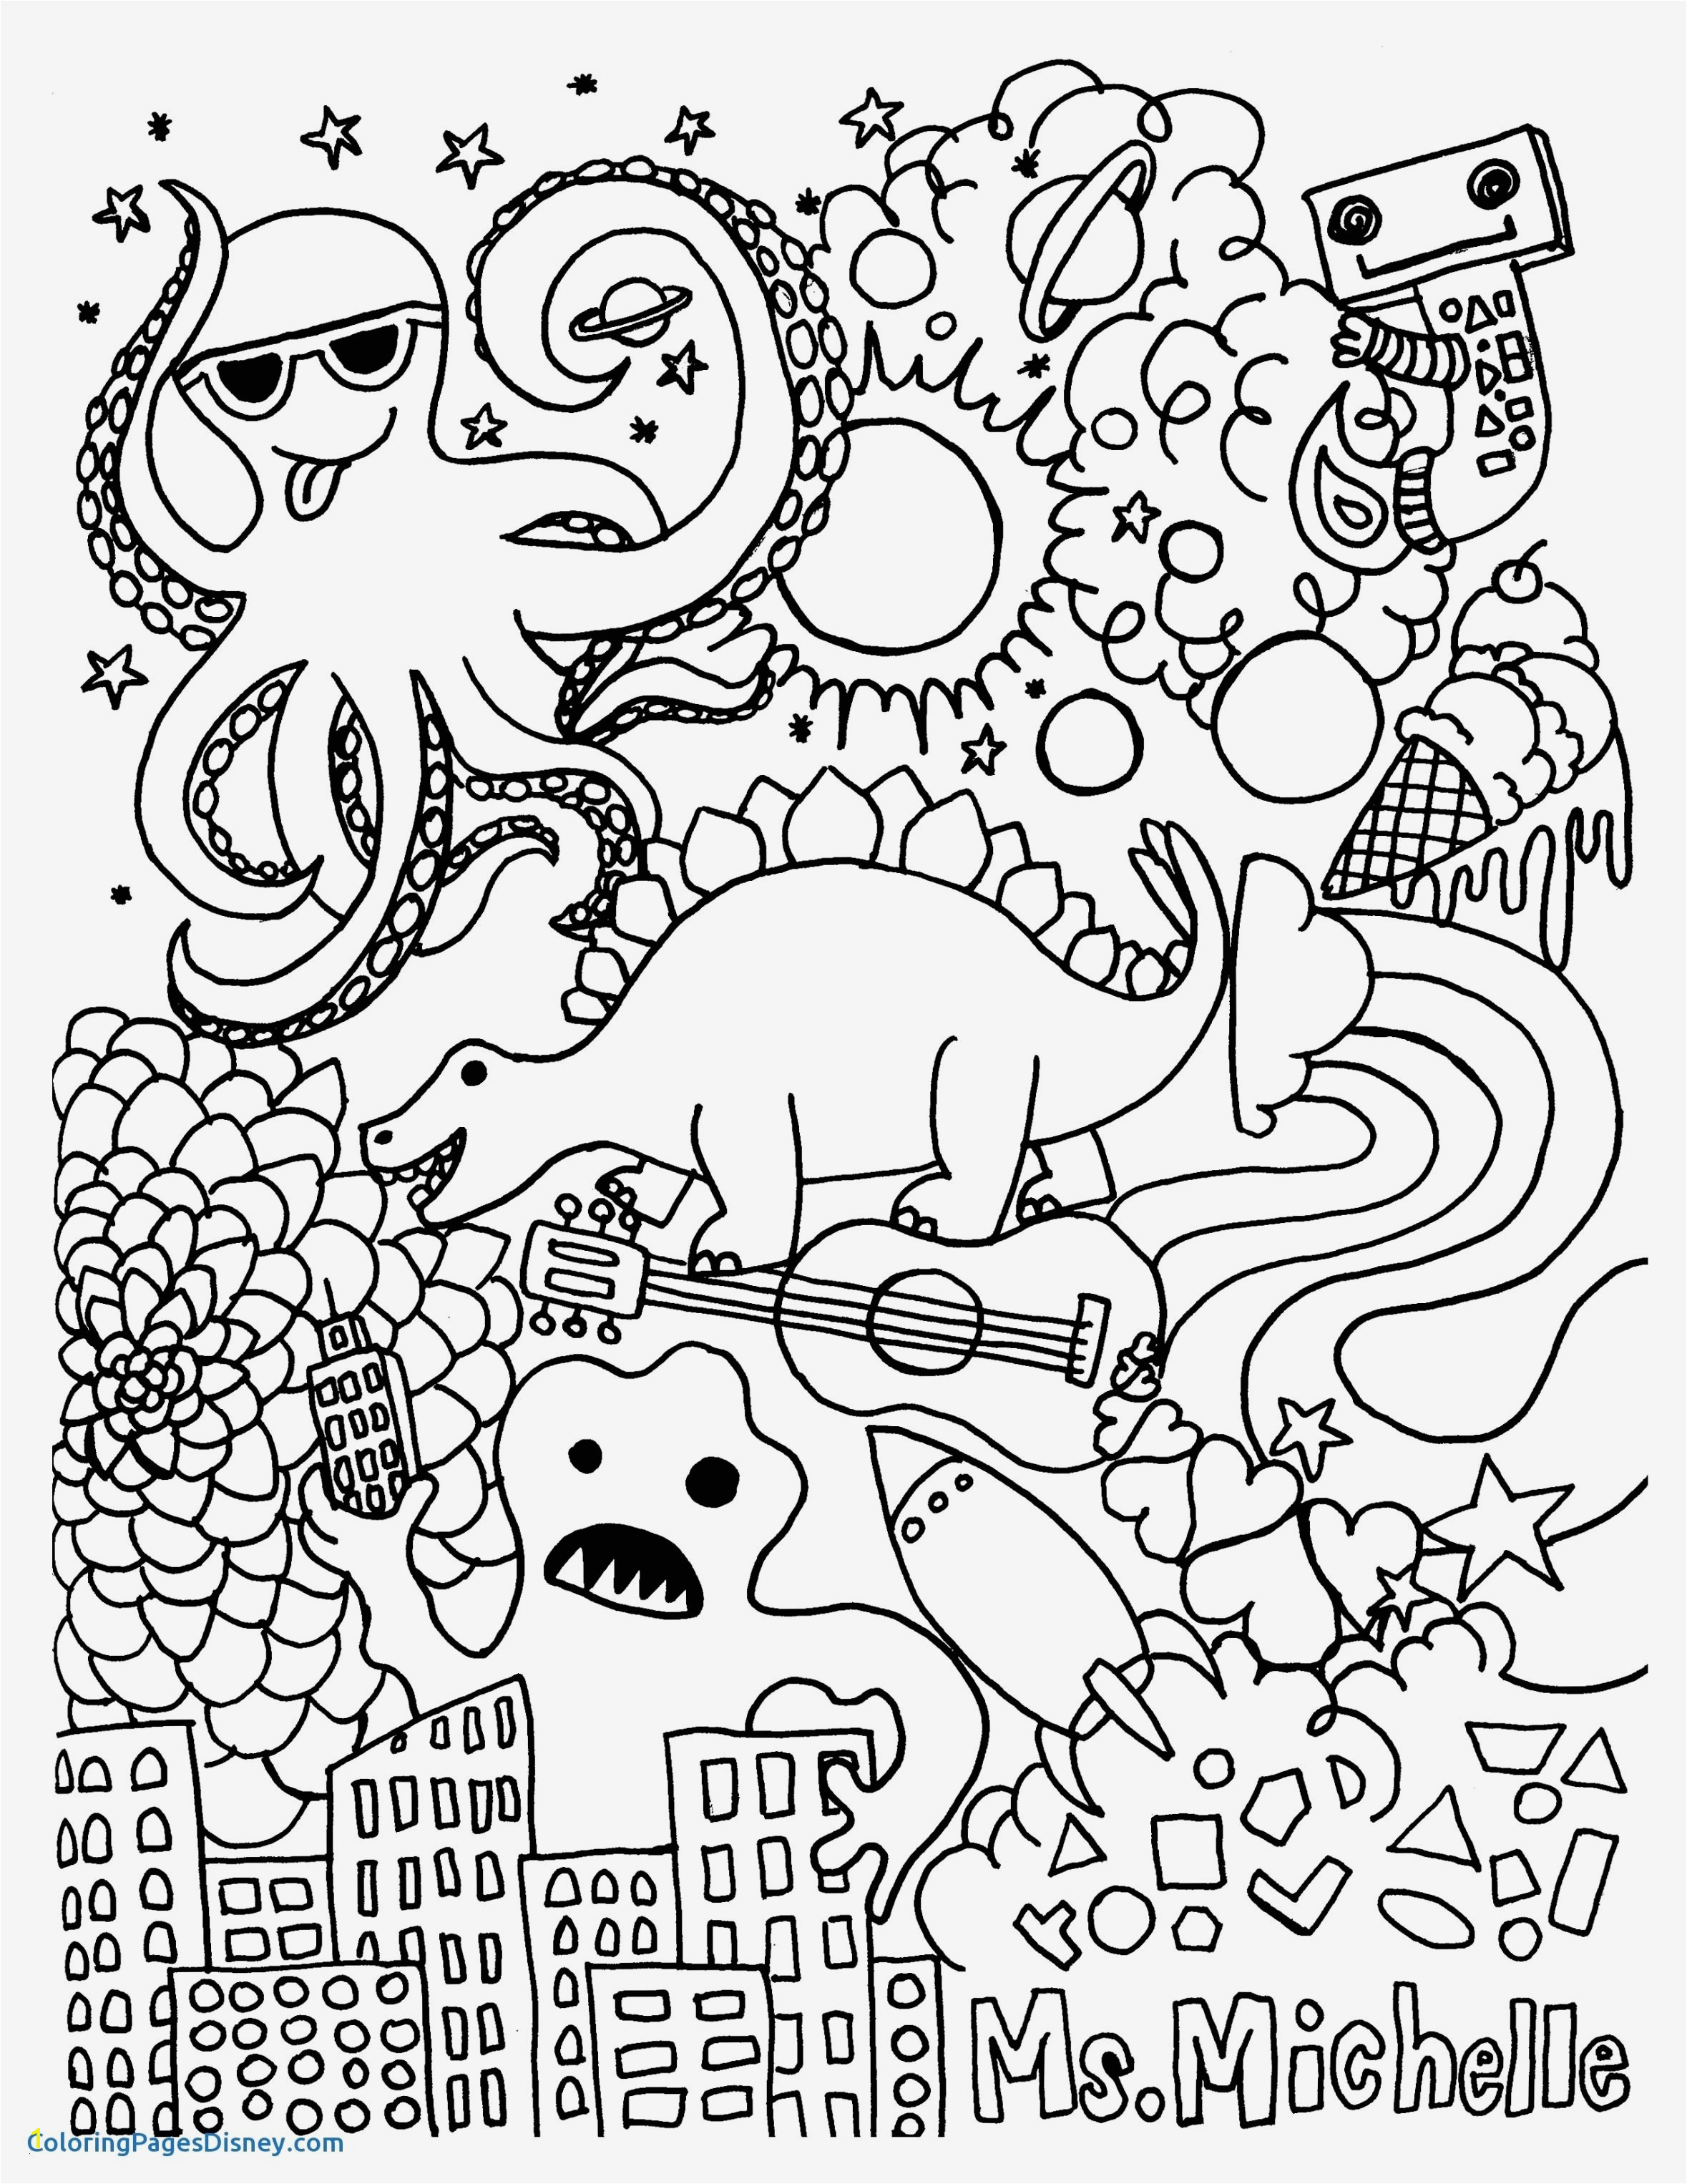 Disney Printable Coloring Pages Halloween Coloriage Halloween Disney Unique S Lovely Disney Halloween